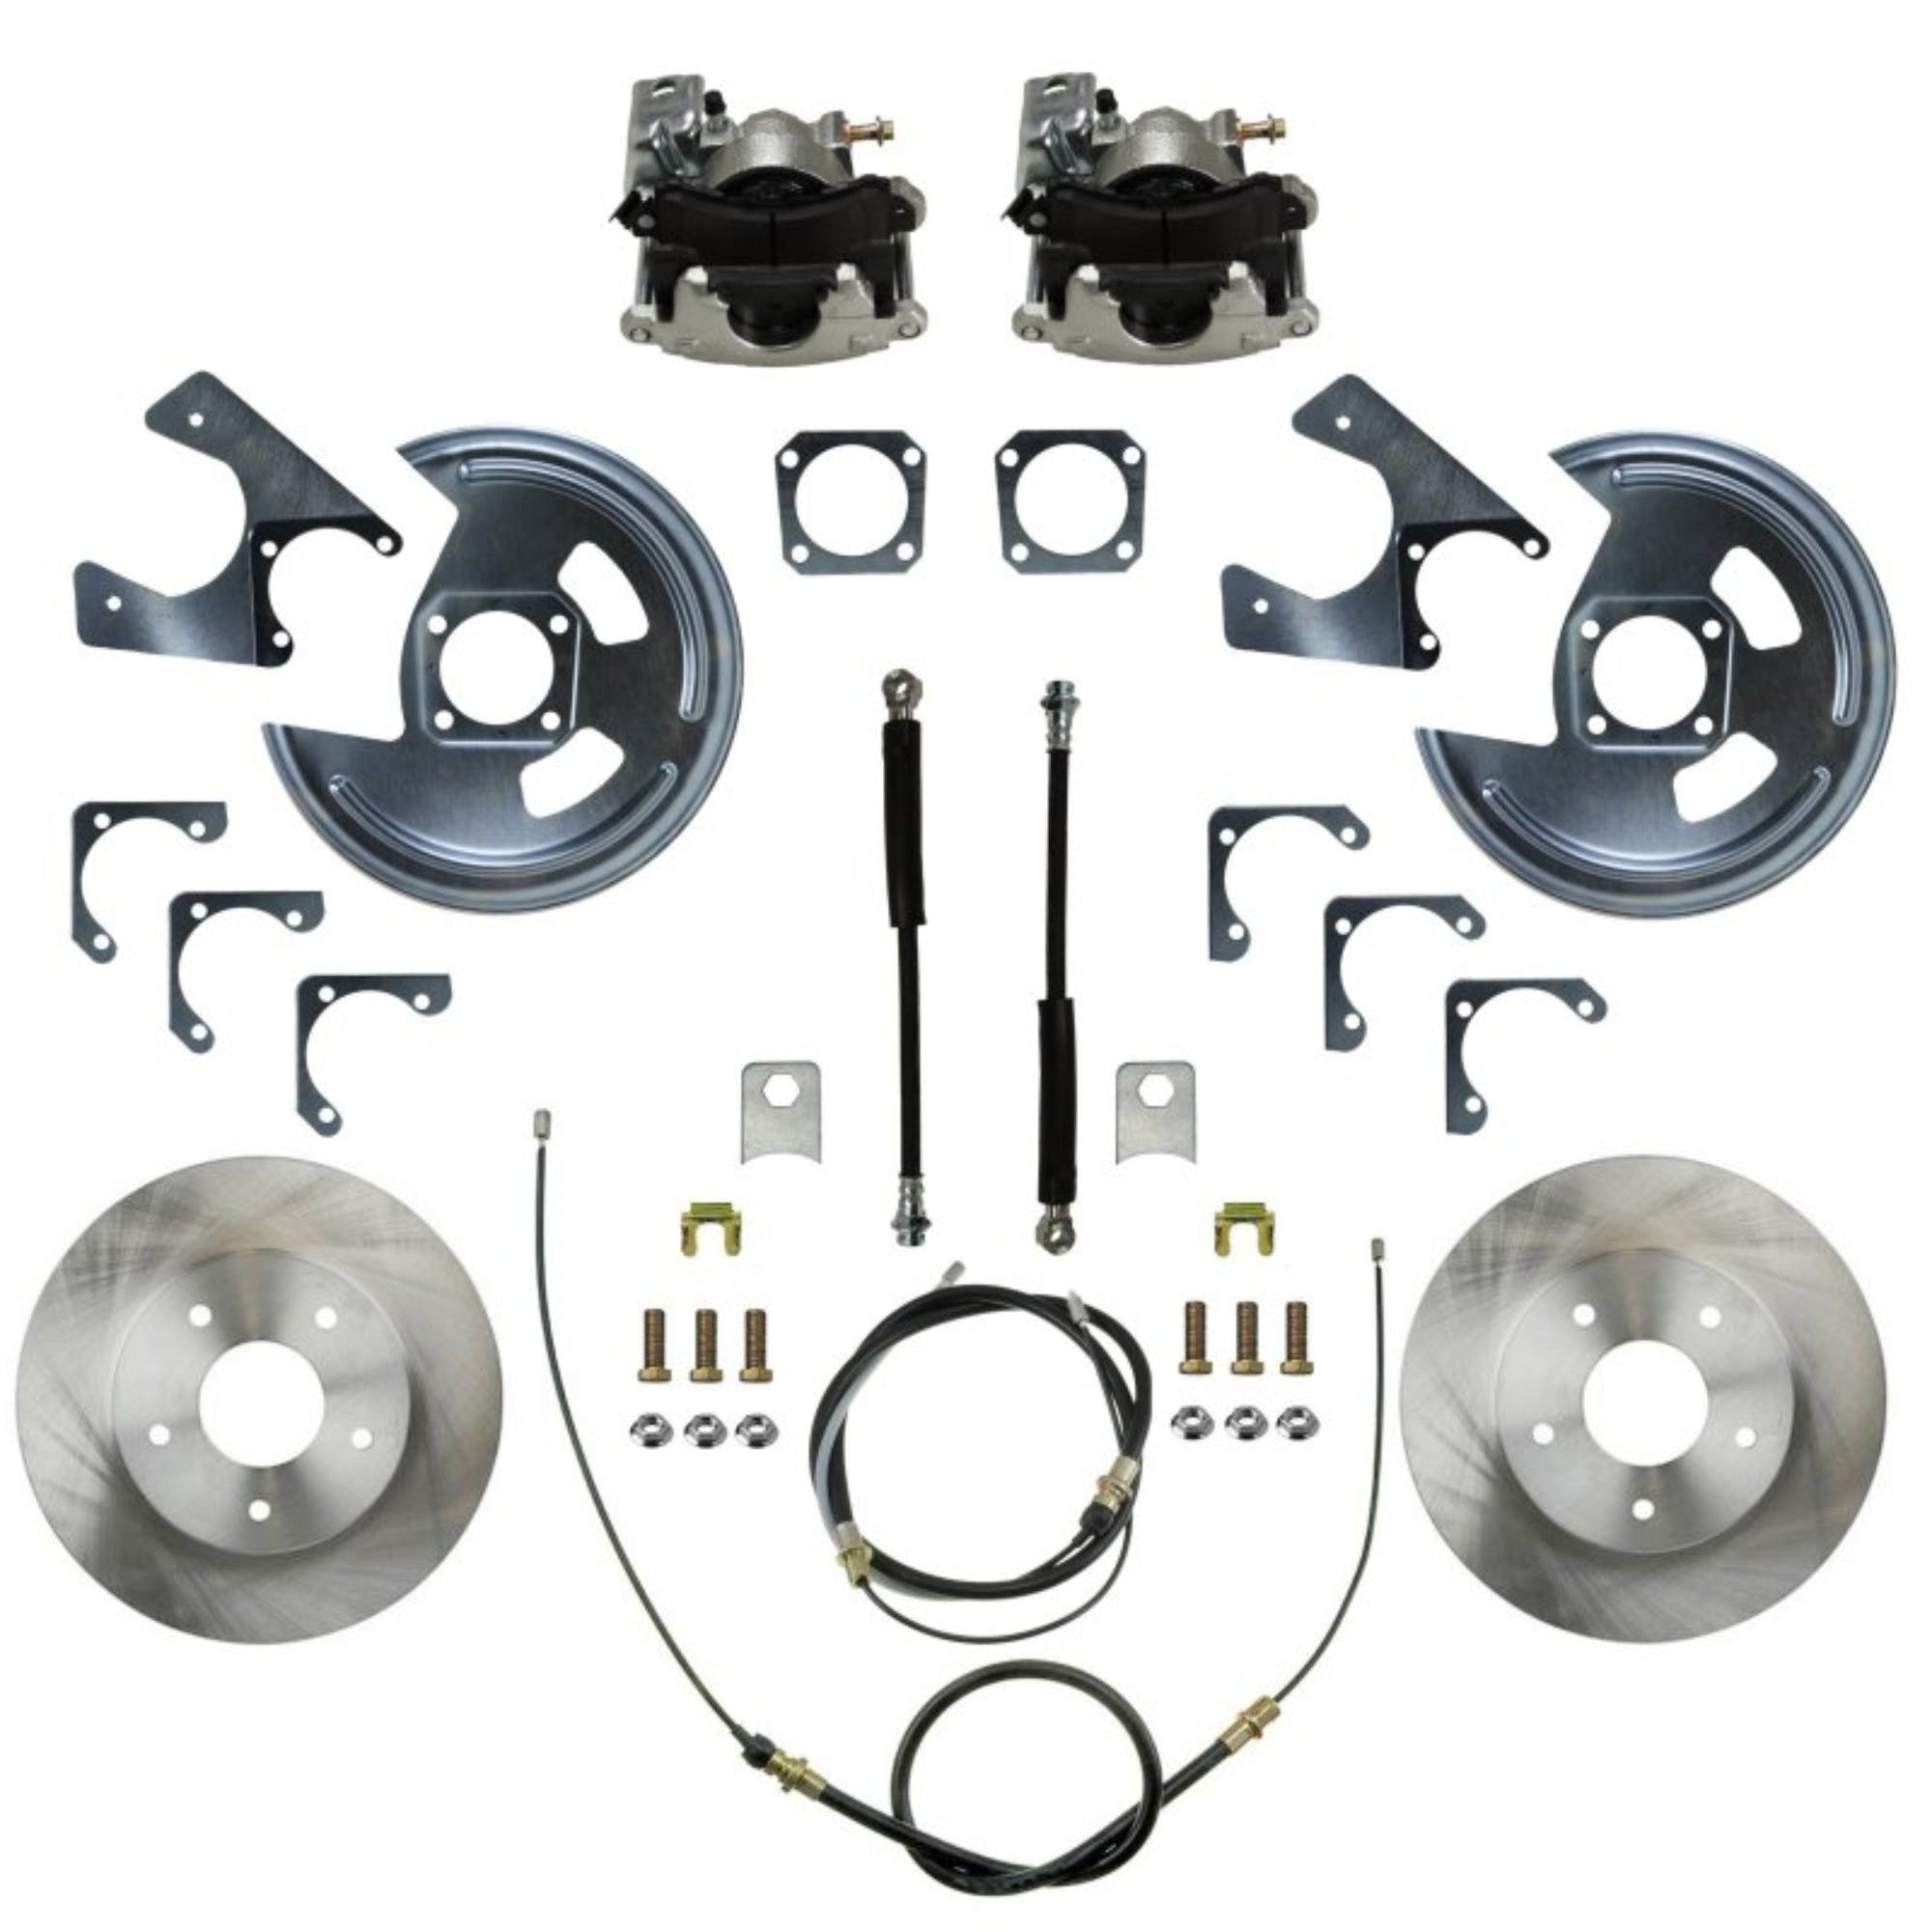 LEED Brakes RC1003 Rear Drum to Disc Brake Conversion Kit - 11 inch Rotor Staggered Shock